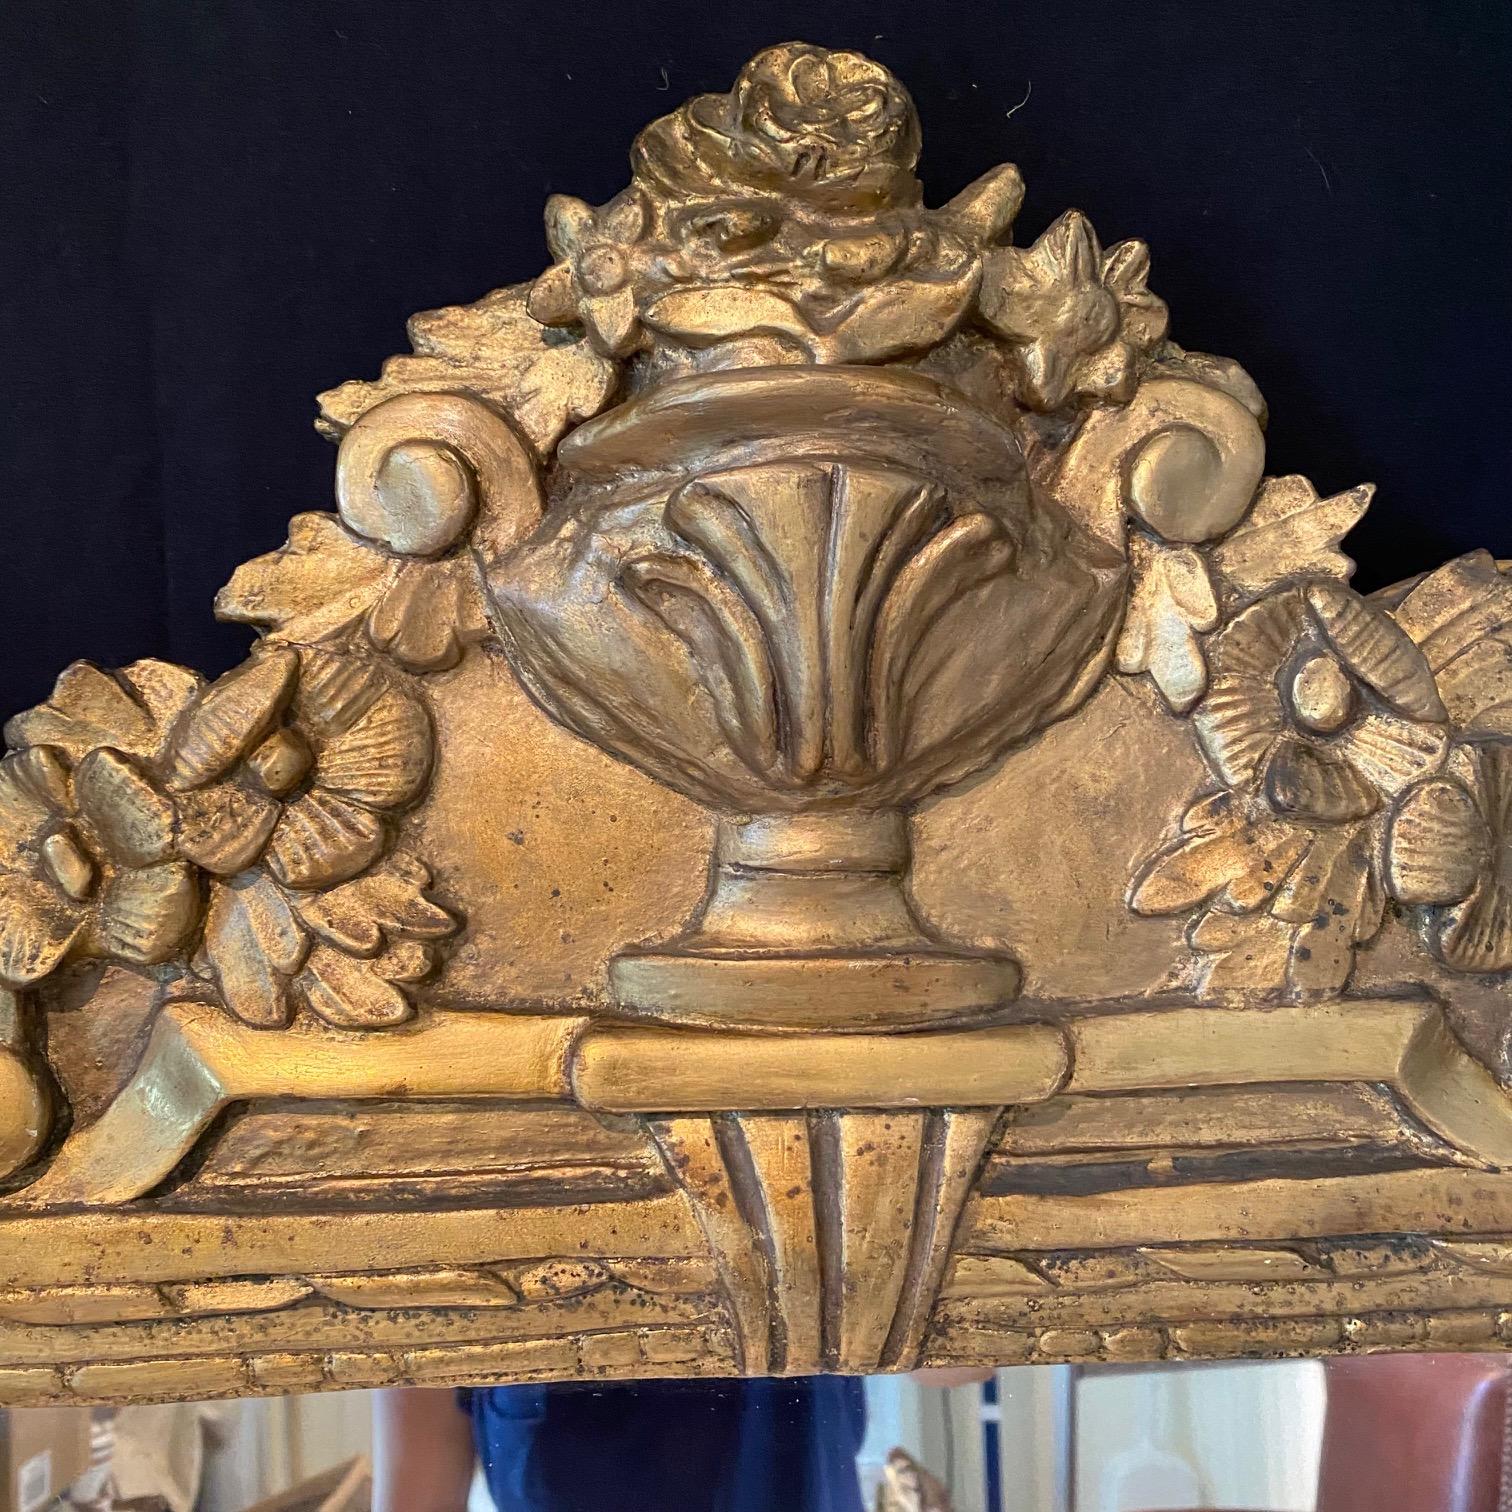 Mirror from France in the Louis XVI period. This piece is made of stuccoed hand-carved wood with a fronton that features an urn and lovely floral motifs.

#6462